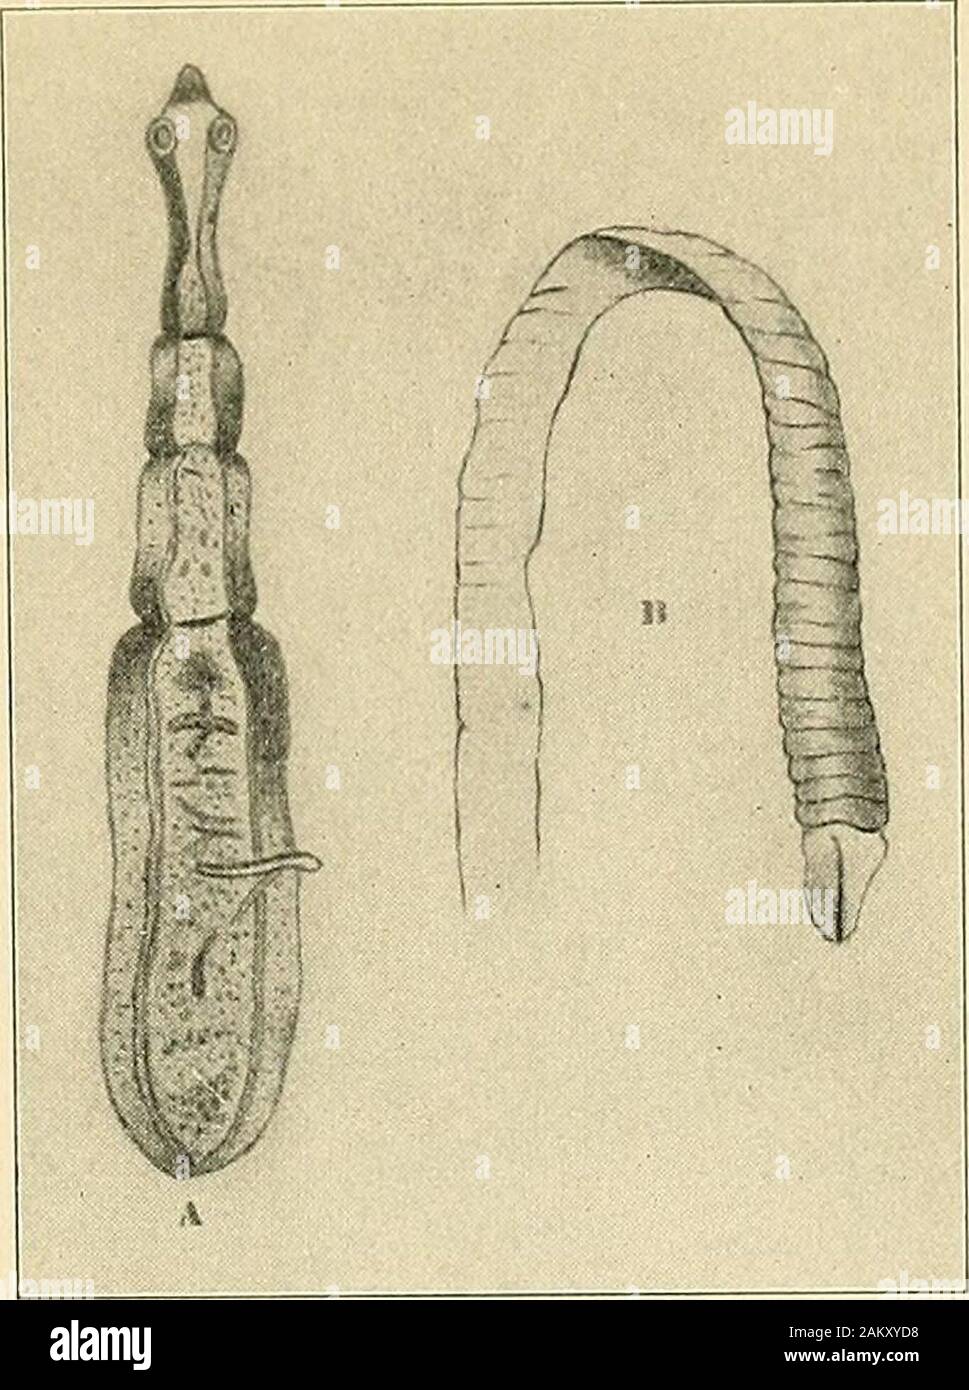 The hygiene of transmissible diseases; their causation, modes of dissemination, and methods of prevention . between the time ofingestion of the larvae of this worm and the appearance ofproglottides in the dejecta. Tcenia saginata is commoner in this country than is tcBiiiasolium, probably owing to the greater care that is given tothe cooking of pork. Bothriocephalus latus, a large, long cestode found morecommonly in those whose diet is composed of fresh fish. Itis said to be common in the Baltic provinces and in parts ofSwitzerland. In its larval form it is often encountered in theabdominal ca Stock Photo